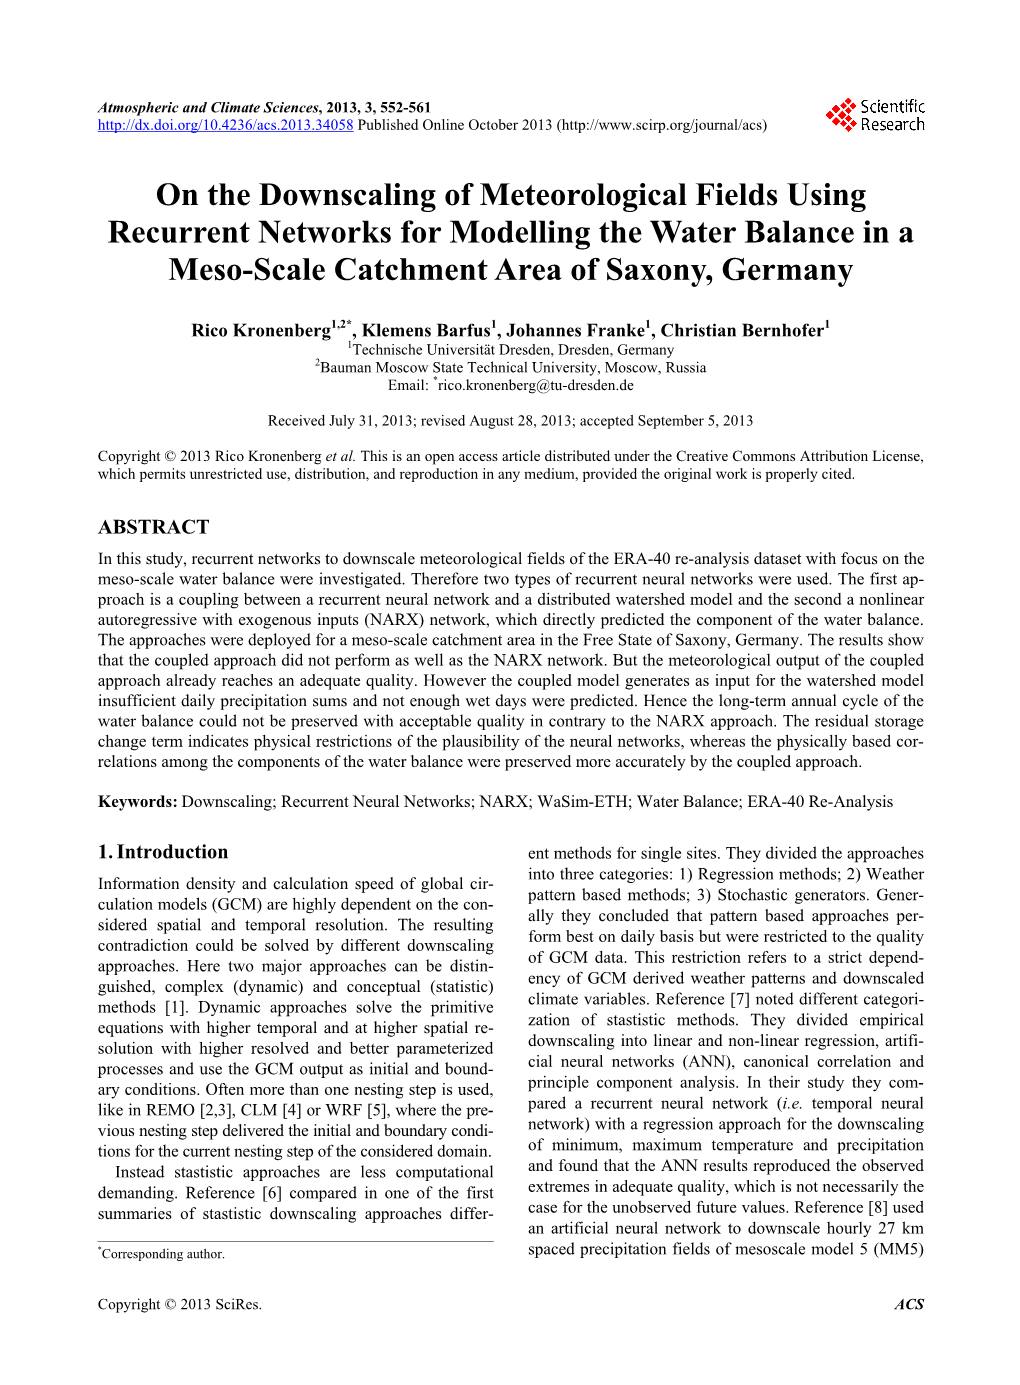 On the Downscaling of Meteorological Fields Using Recurrent Networks for Modelling the Water Balance in a Meso-Scale Catchment Area of Saxony, Germany